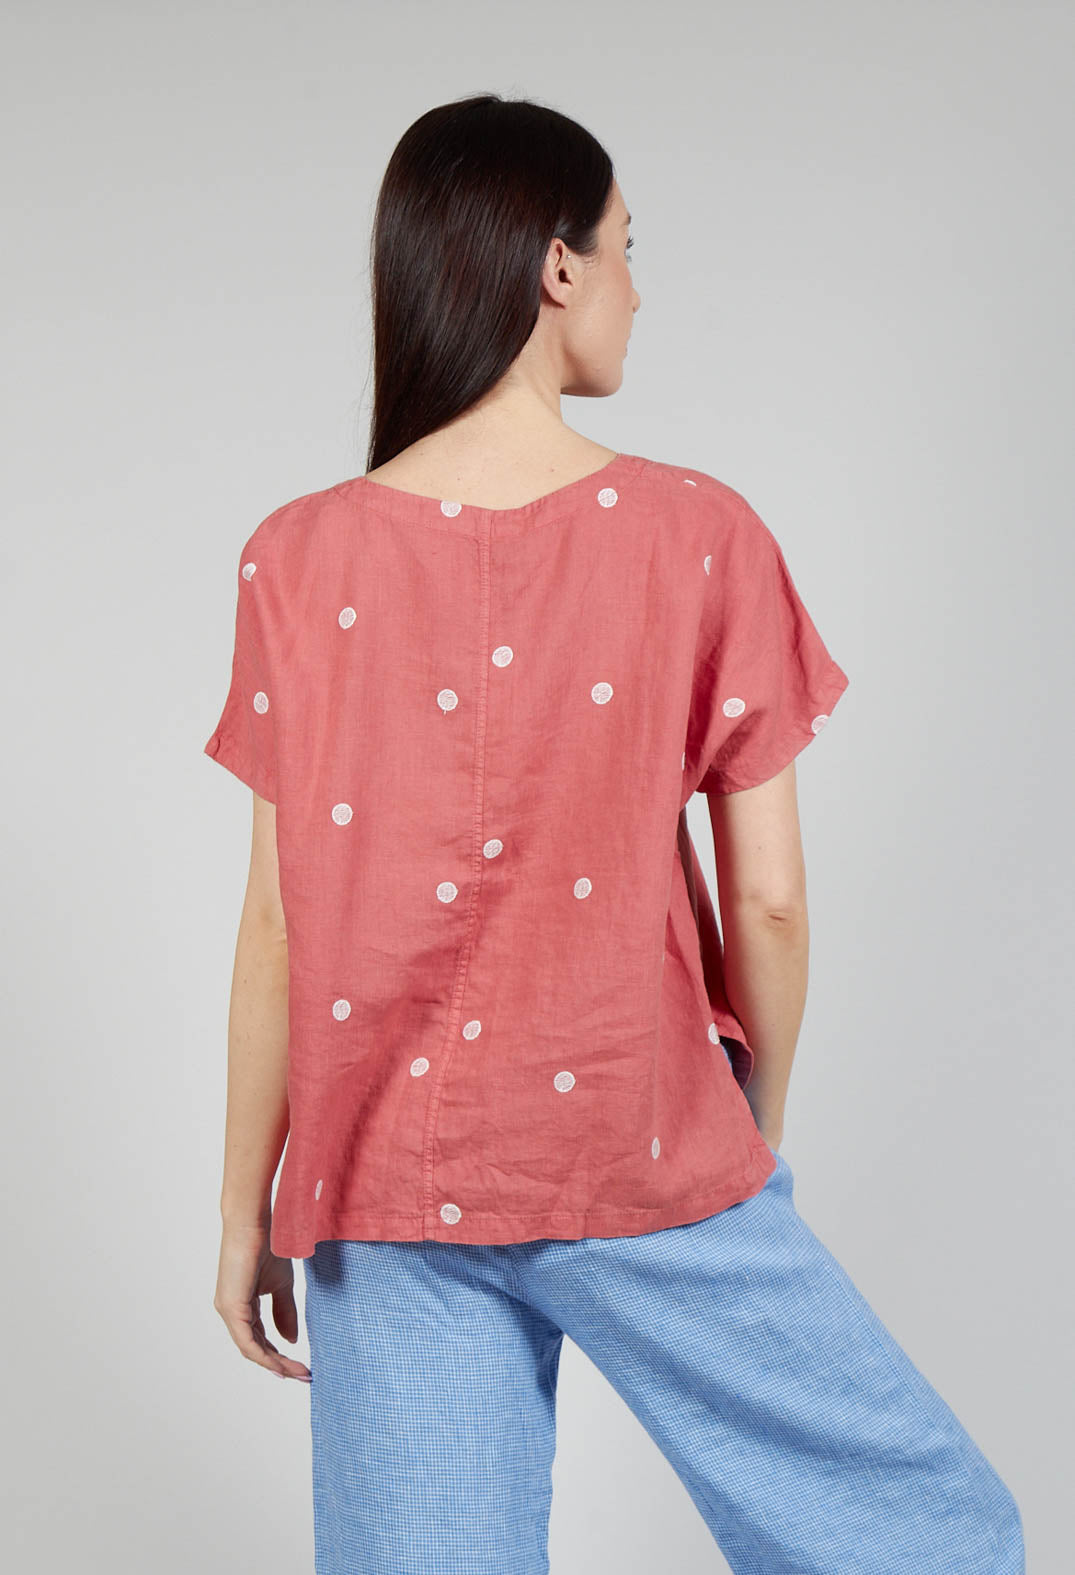 Relaxed Top in Terracotta